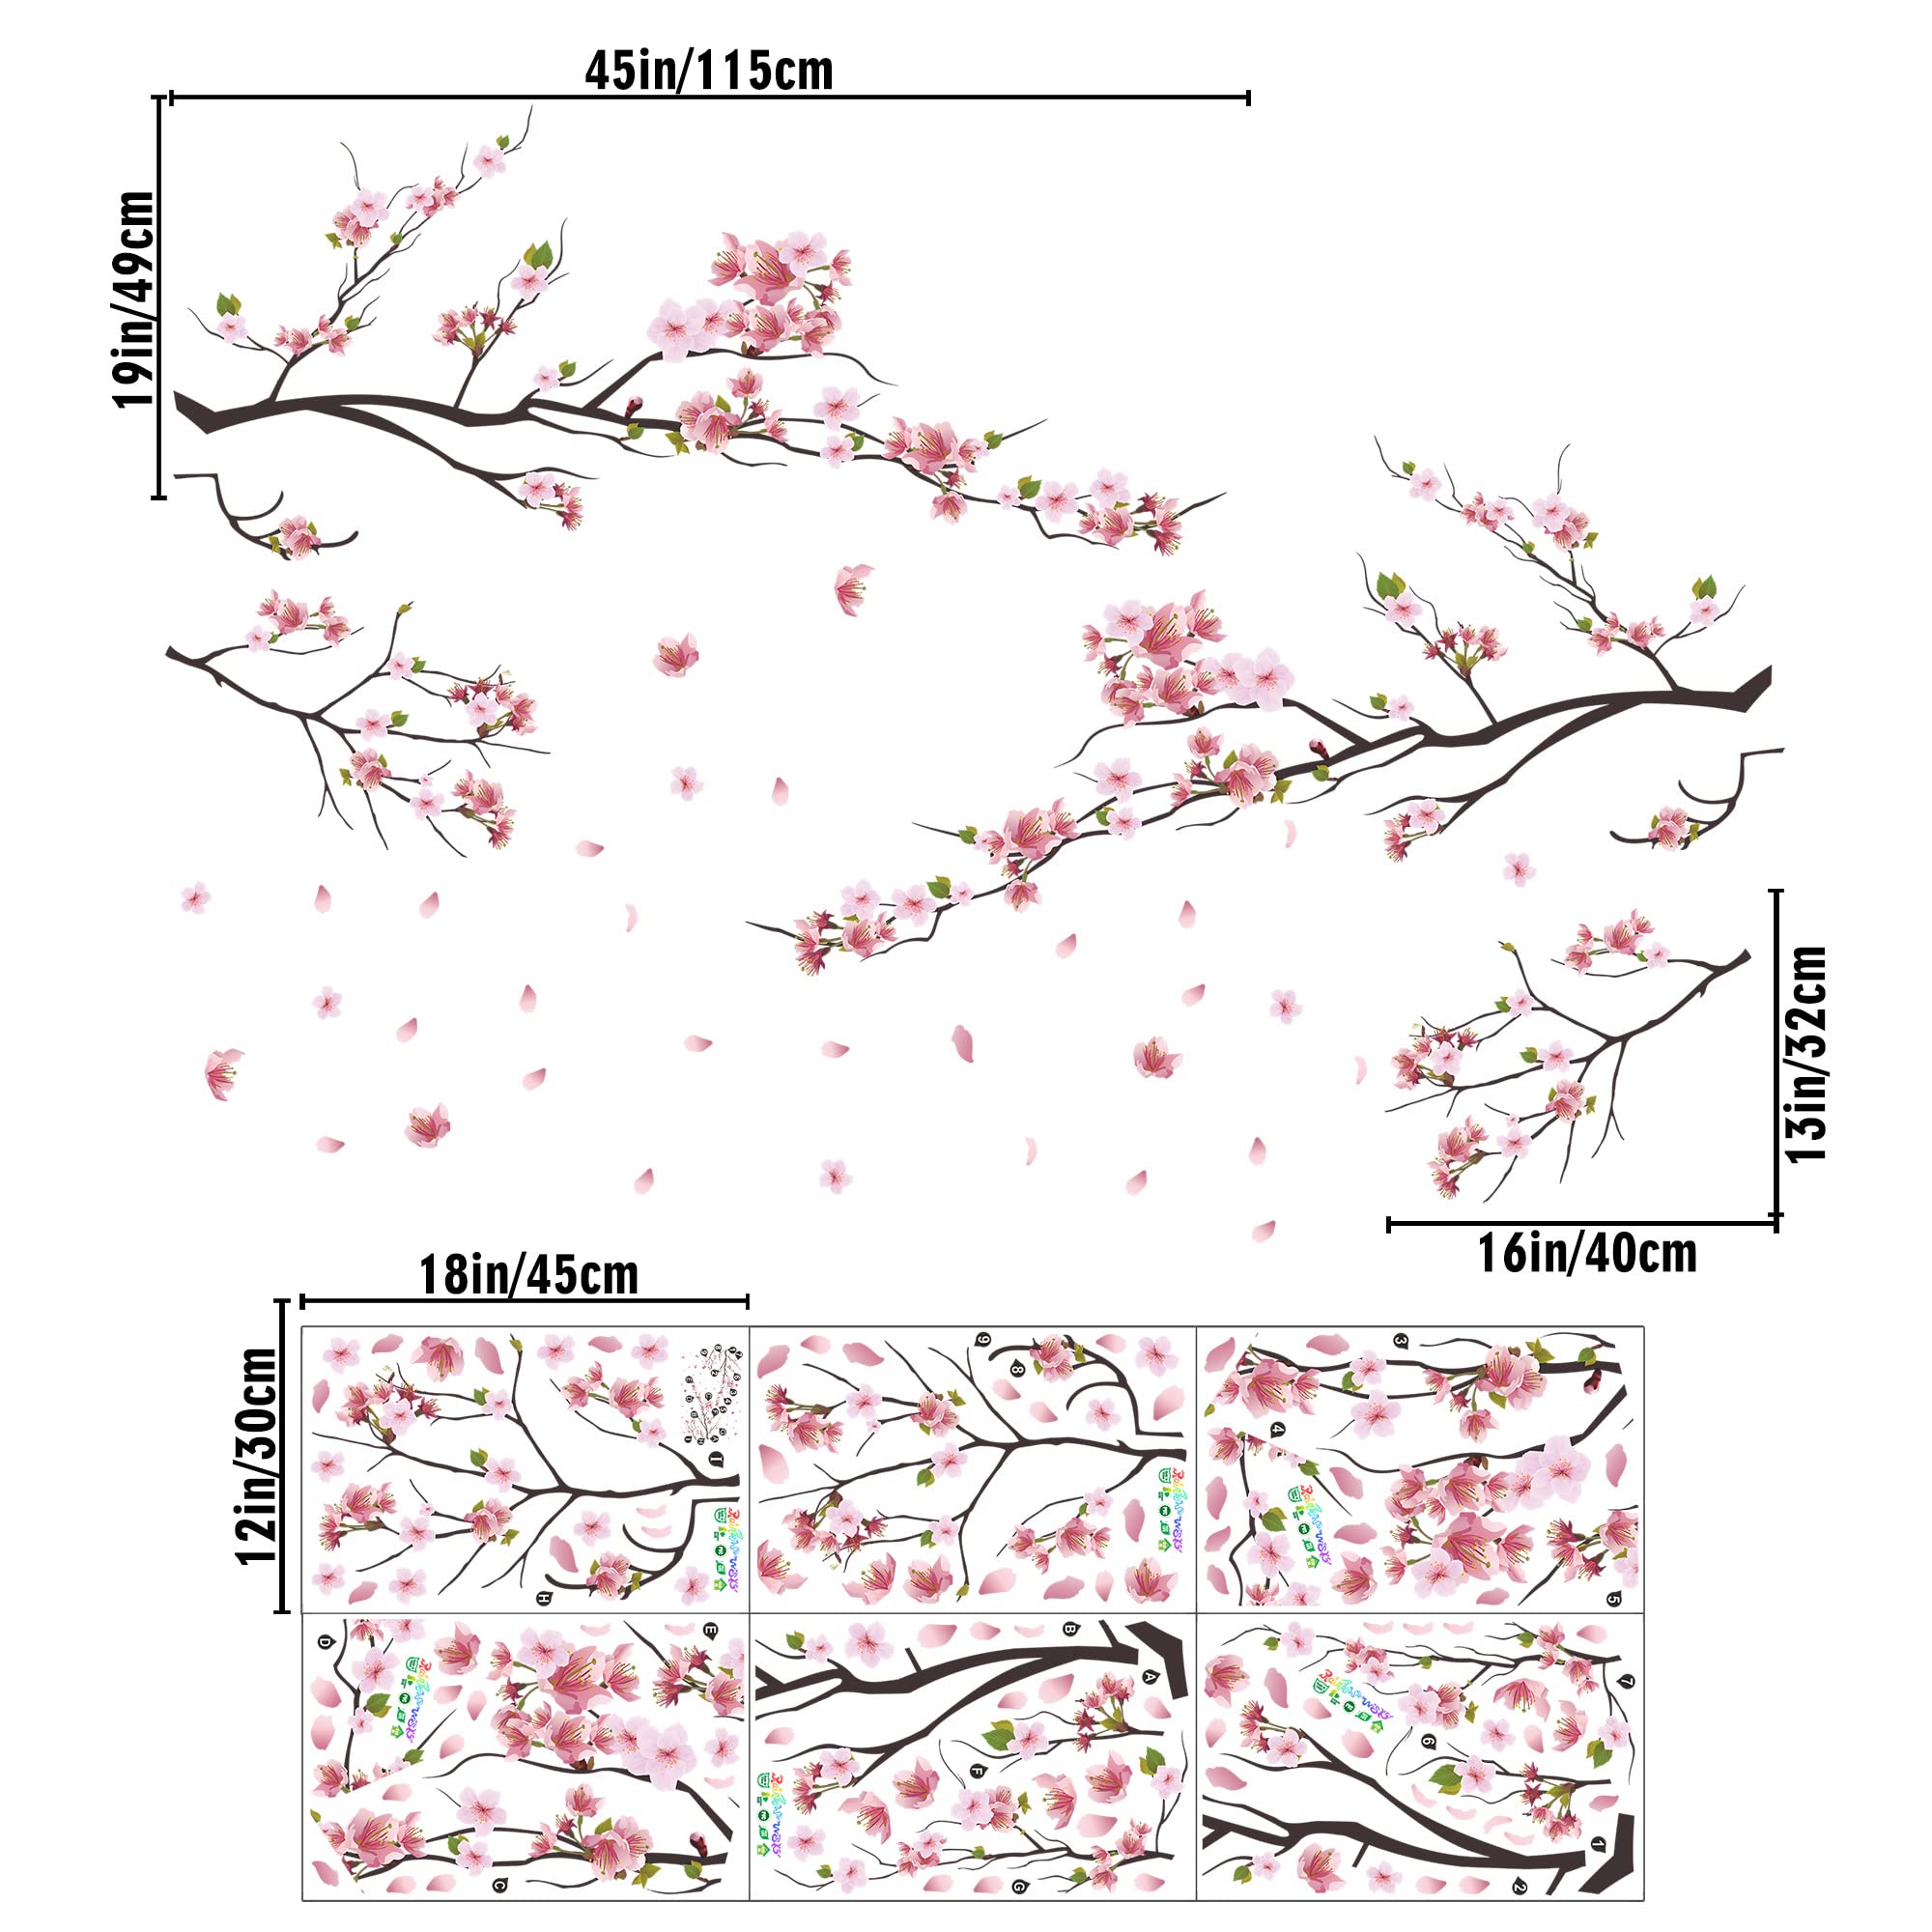 RW-KSR16 Pink Peach Flower Wall Decals Cherry Blossom Tree Branch Wall Stickers DIY Removable Florals Plants Wall Art Decor for Kids Girls Bedroom Livig Room Nursery Office Wall Decoration